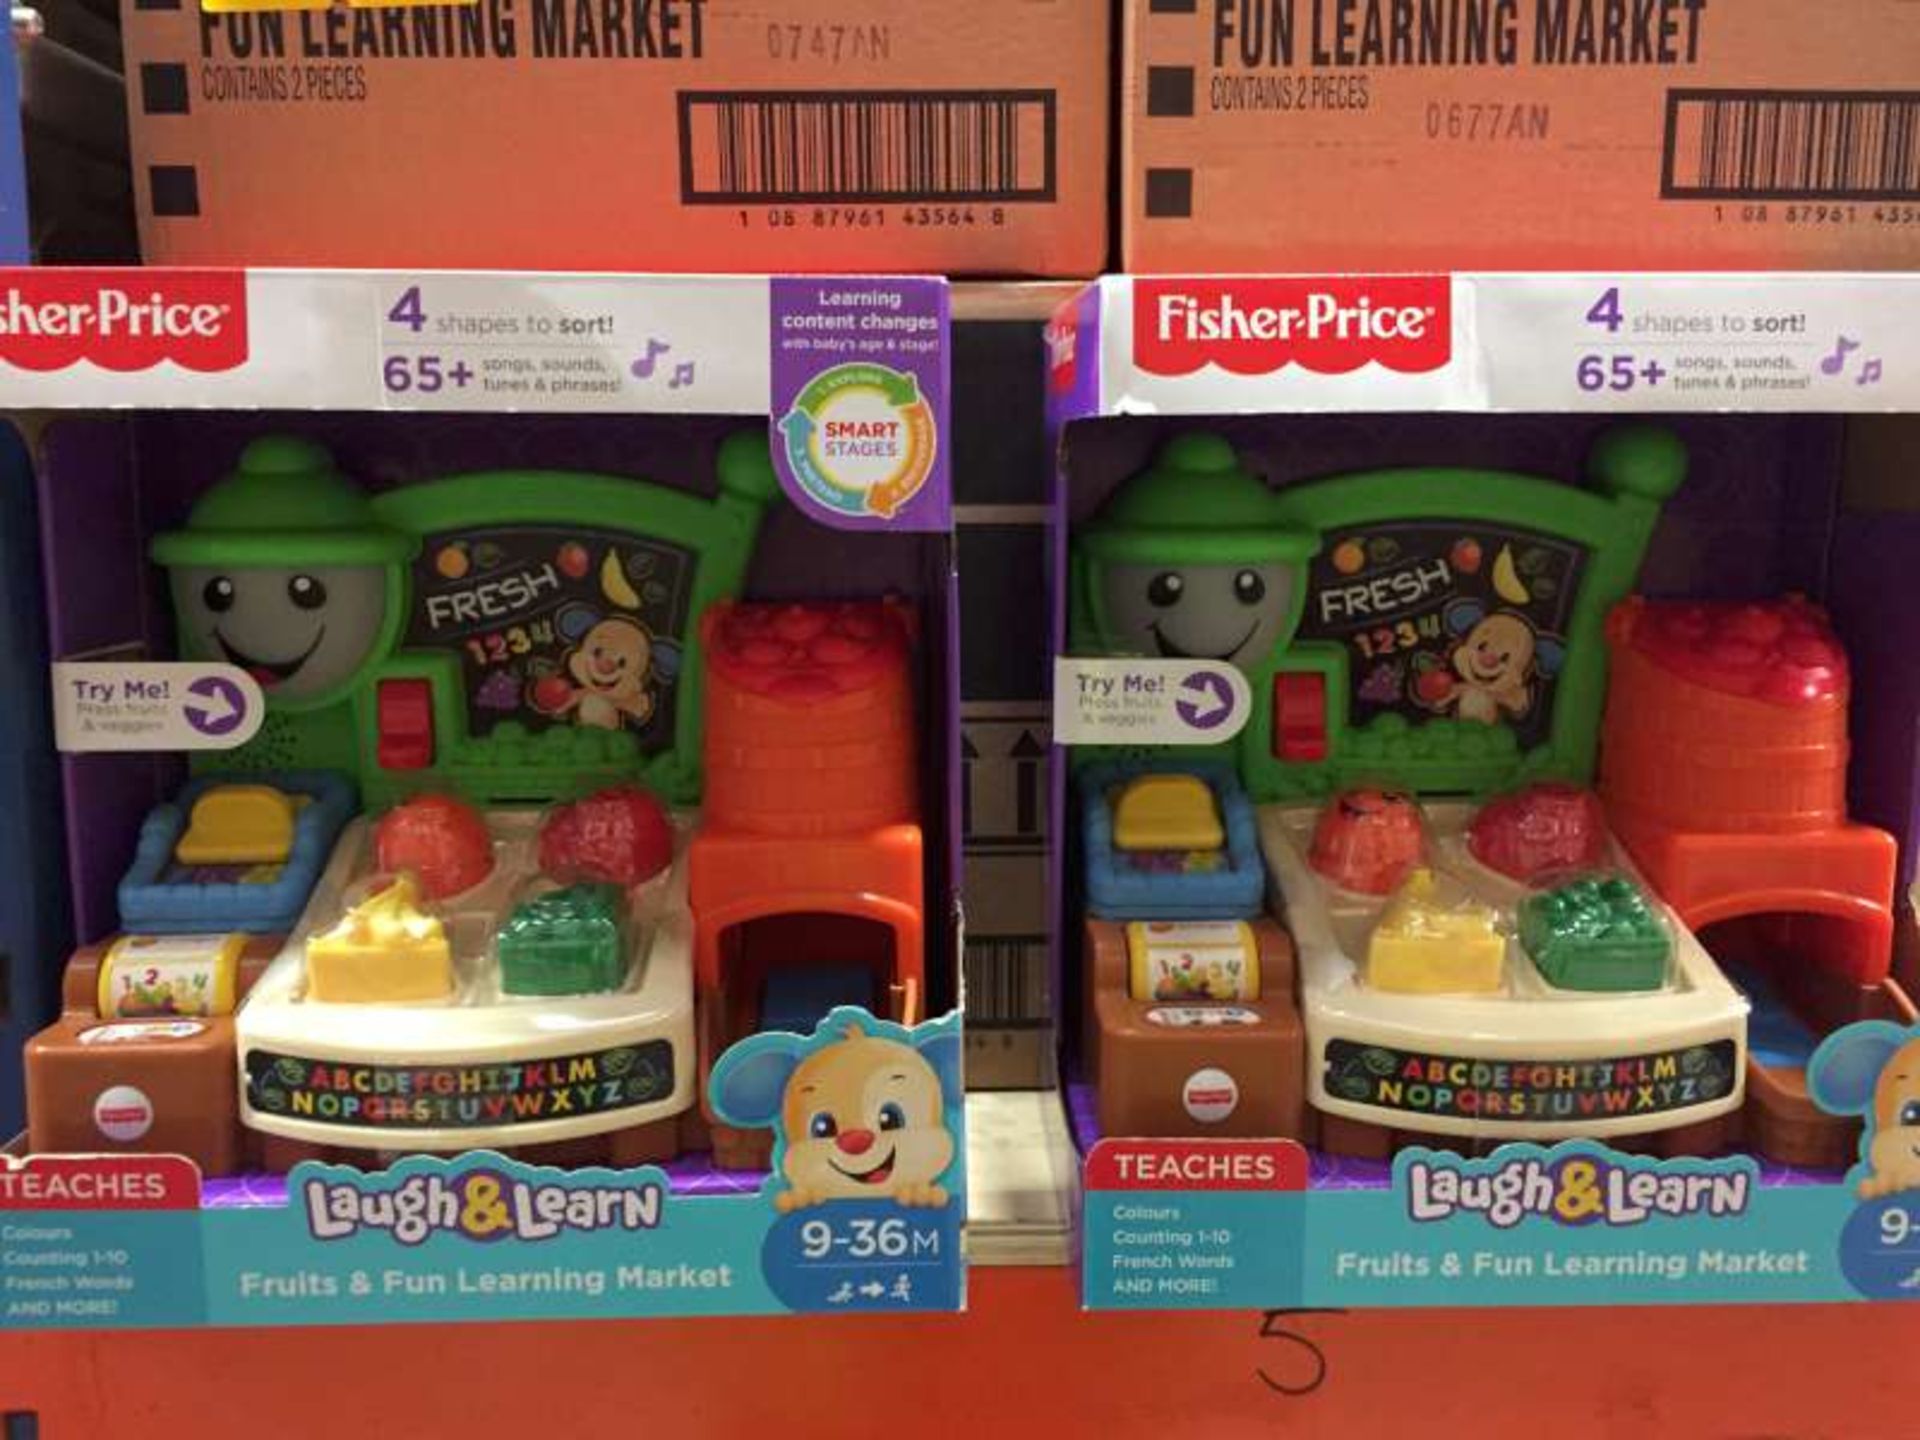 8 X BRAND NEW BOXED FISHER PRICE LAUGH AND LEARN FRUITS AND FUN LEARNING MARKET IN 4 BOXES